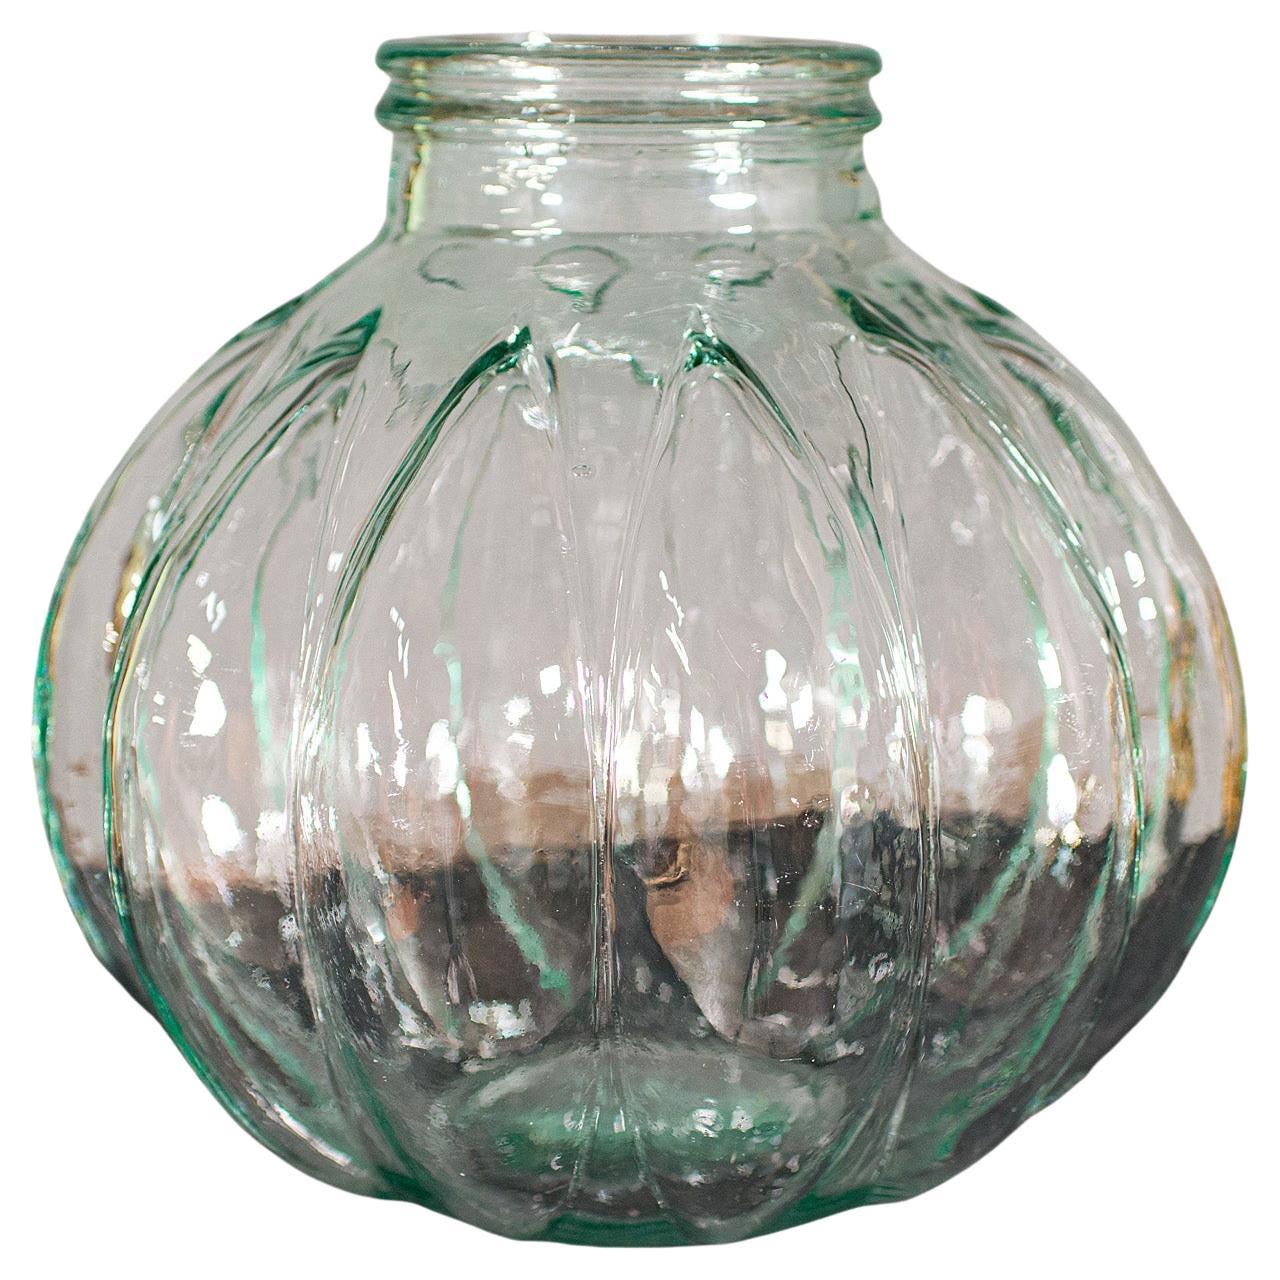 Large Vintage Carboy, English, Decorative, Glass, Storage Jar, Late 20th Century For Sale